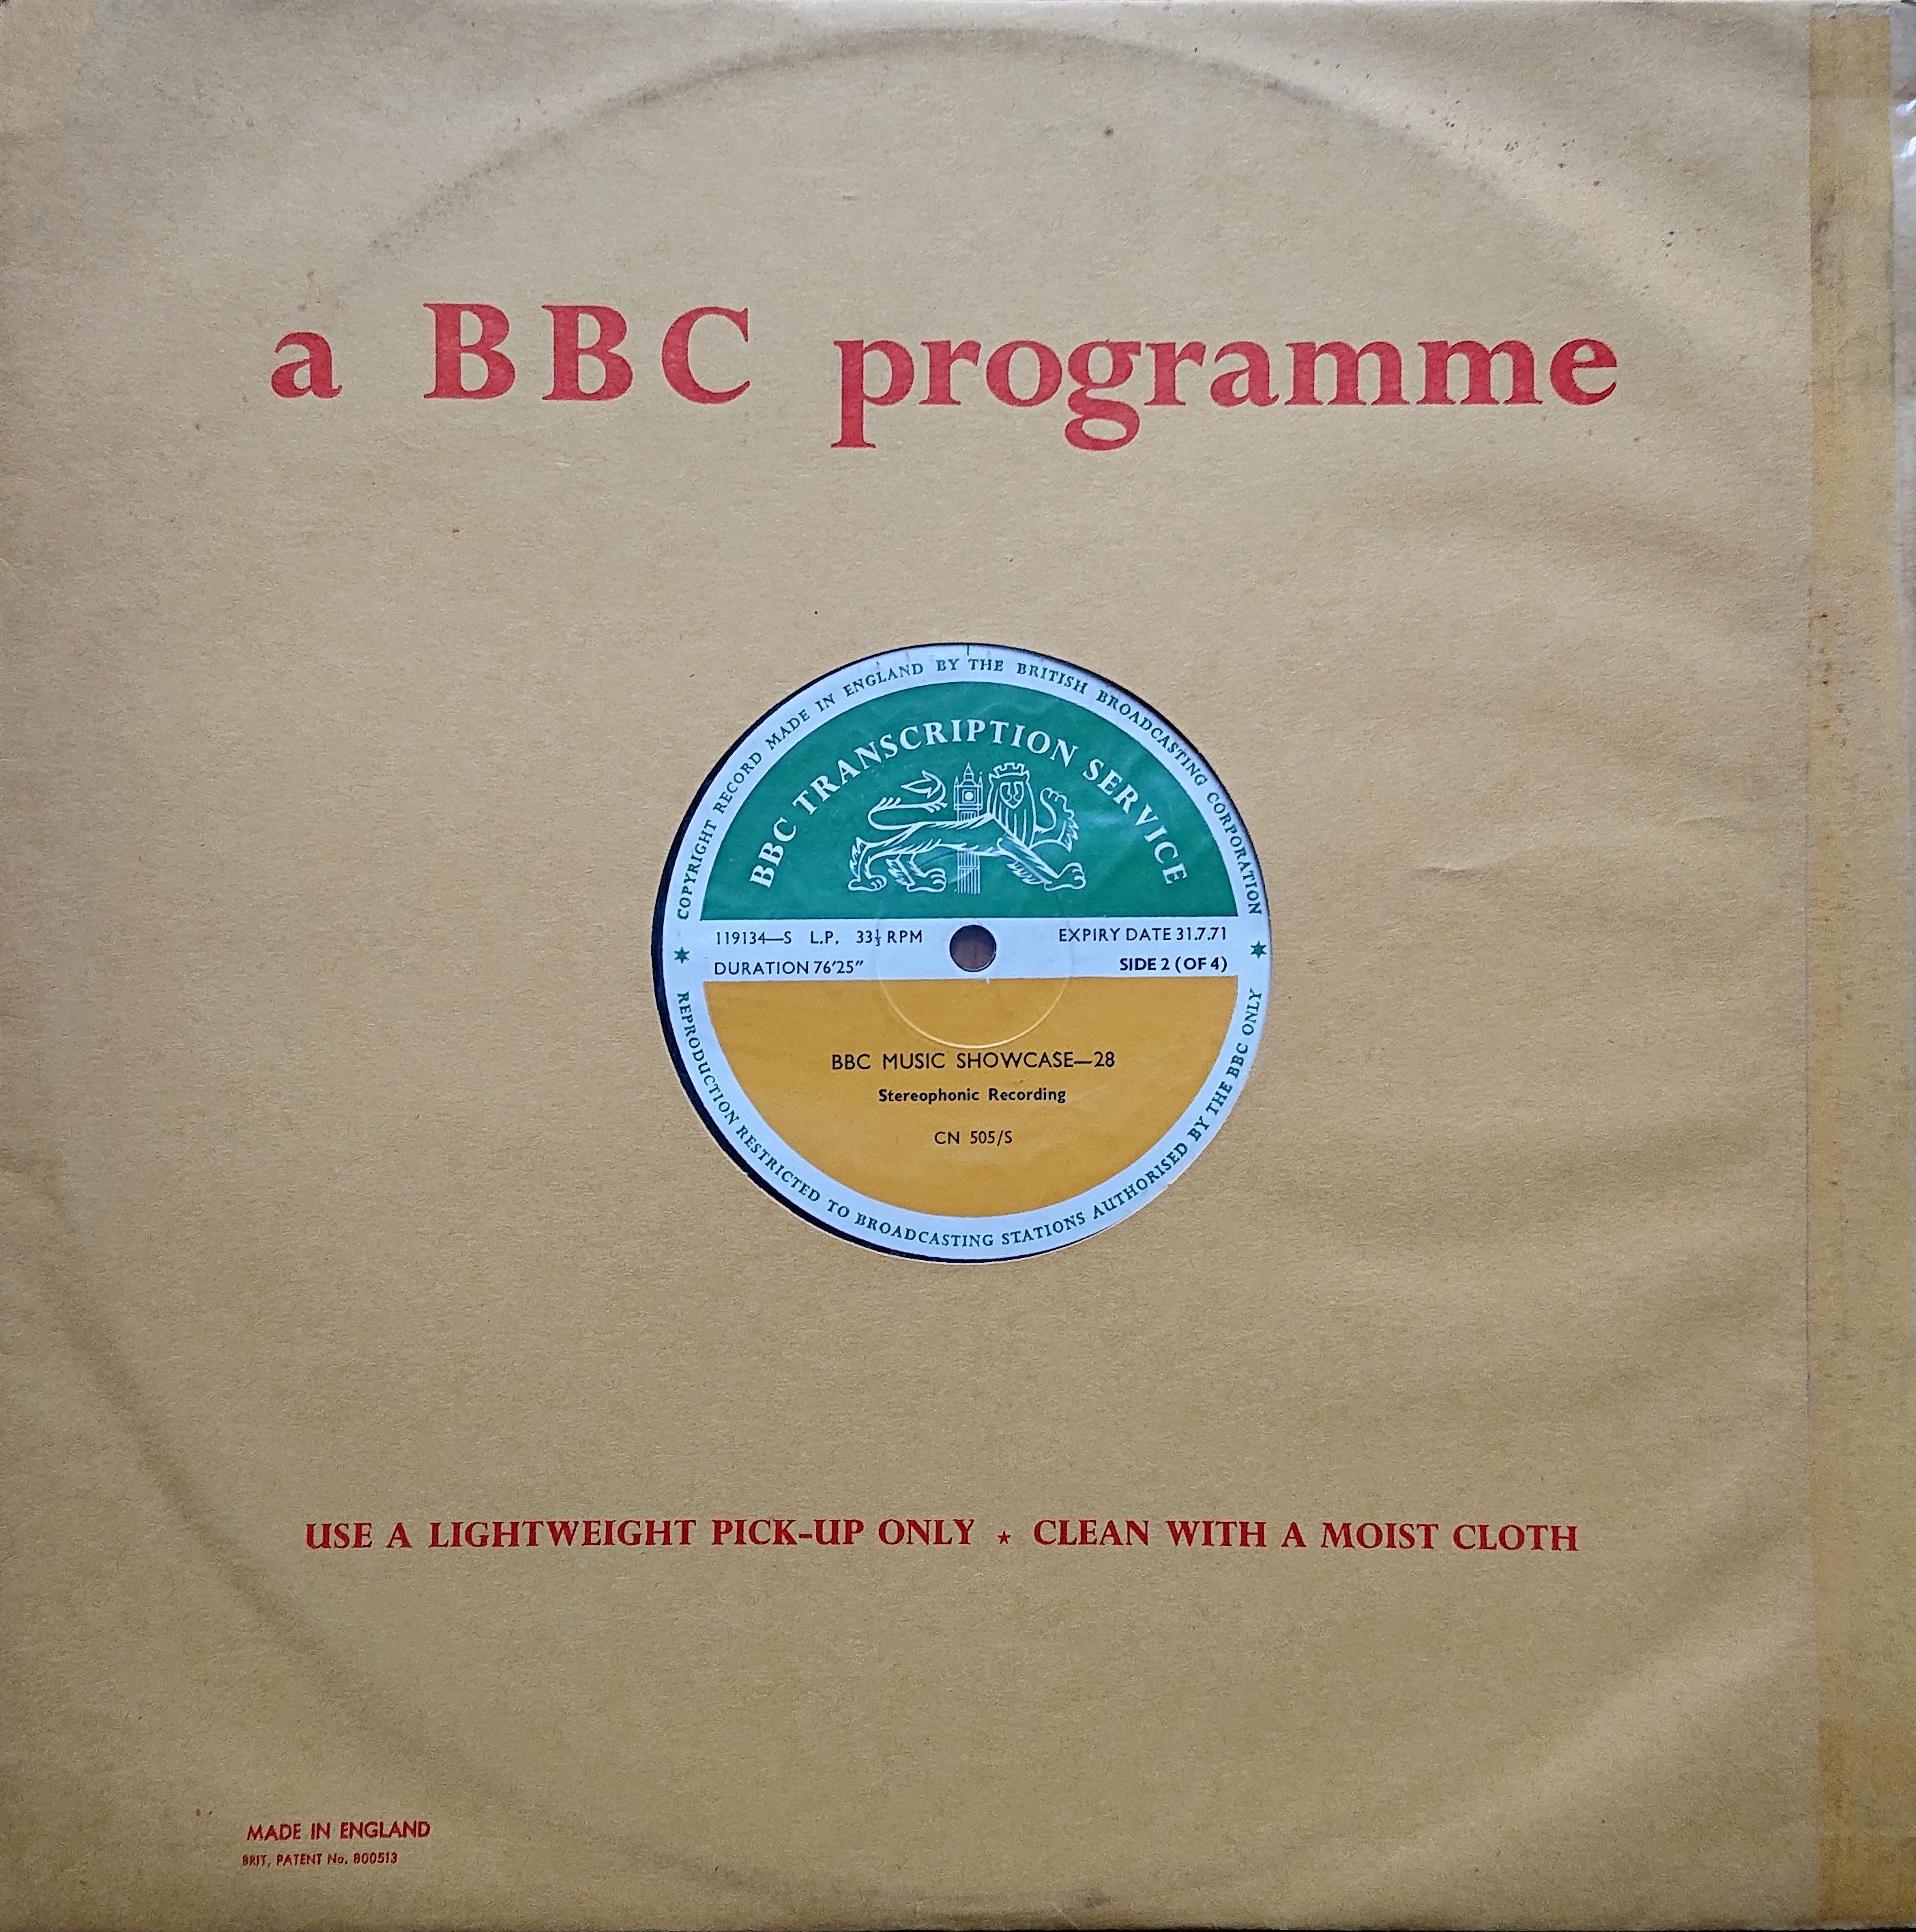 Picture of CN 505 S 56 BBC music showcase - 28 (Sides 2 & 4) by artist Various from the BBC albums - Records and Tapes library